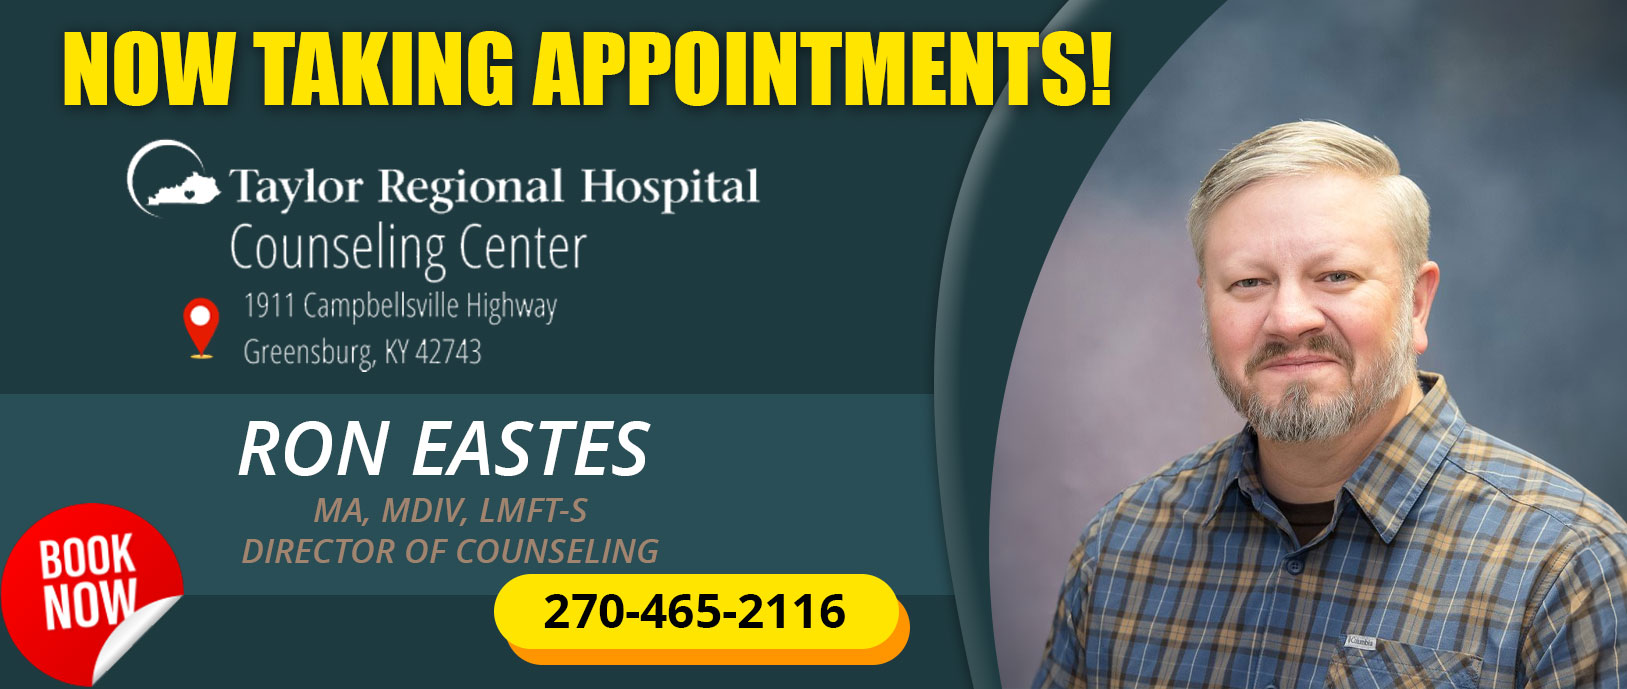 Now Taking Appointments

Taylor Regional Hospital Counseling Center
1911 Campbellsville Highway
Greensburg, KY, 42743

Ron Eastes
MA, MDIV, LMFT-S
Director of Counseling 

270-465-2116